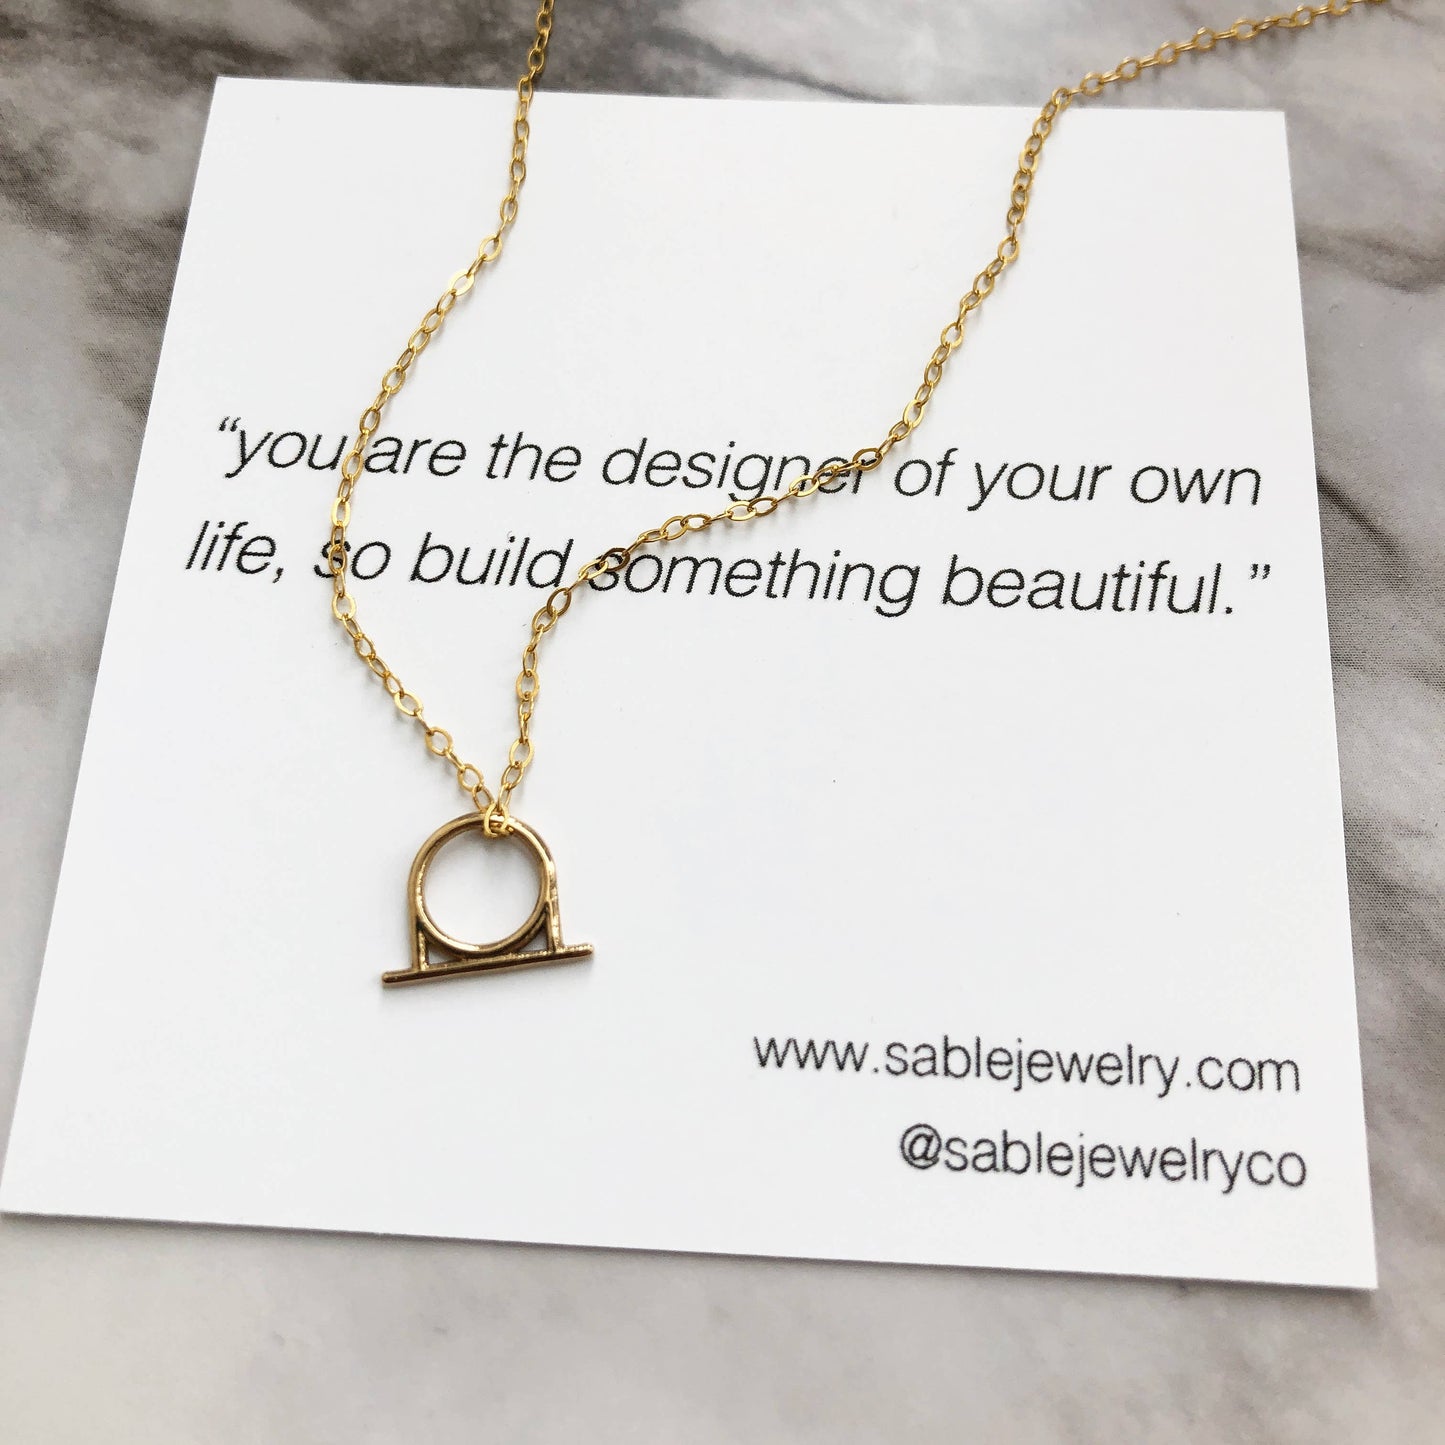 Emblem Charm Necklace: Solid 14k Gold Charm + Gold Fill Chain